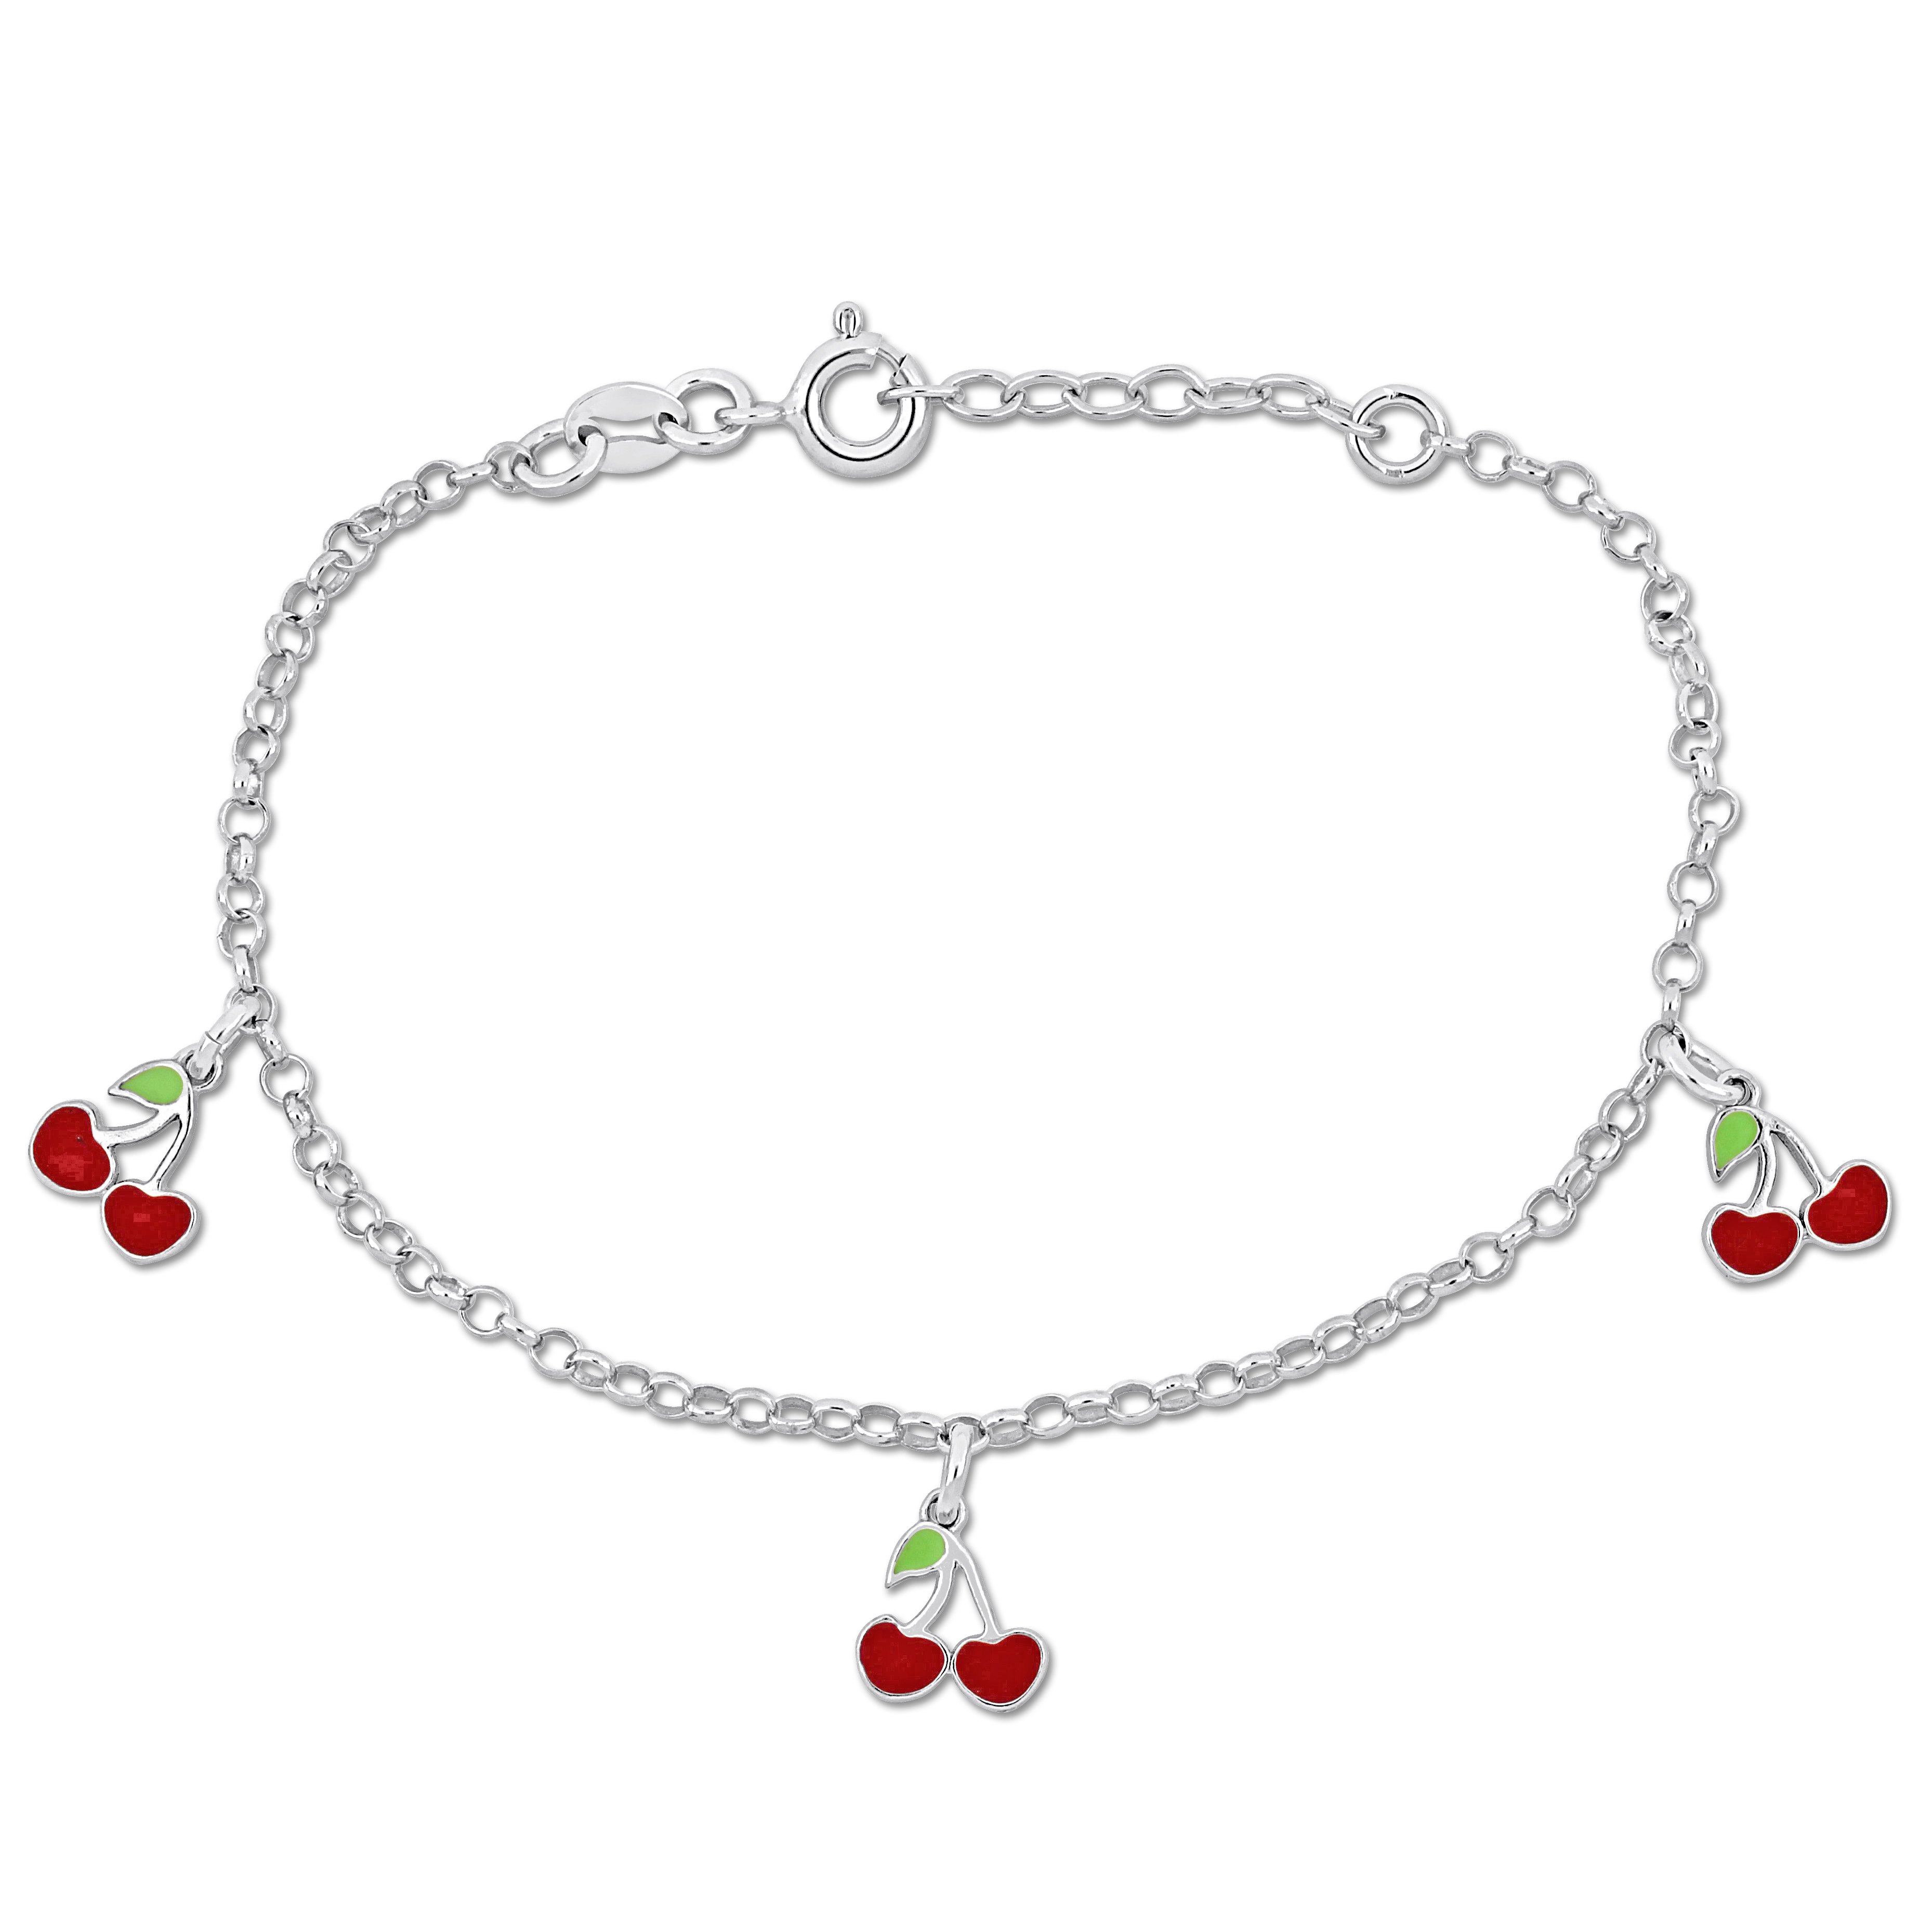 White and Red Enamel Cherry Charm Rolo Chain Bracelet in Sterling Silver - 6.5+1 in.